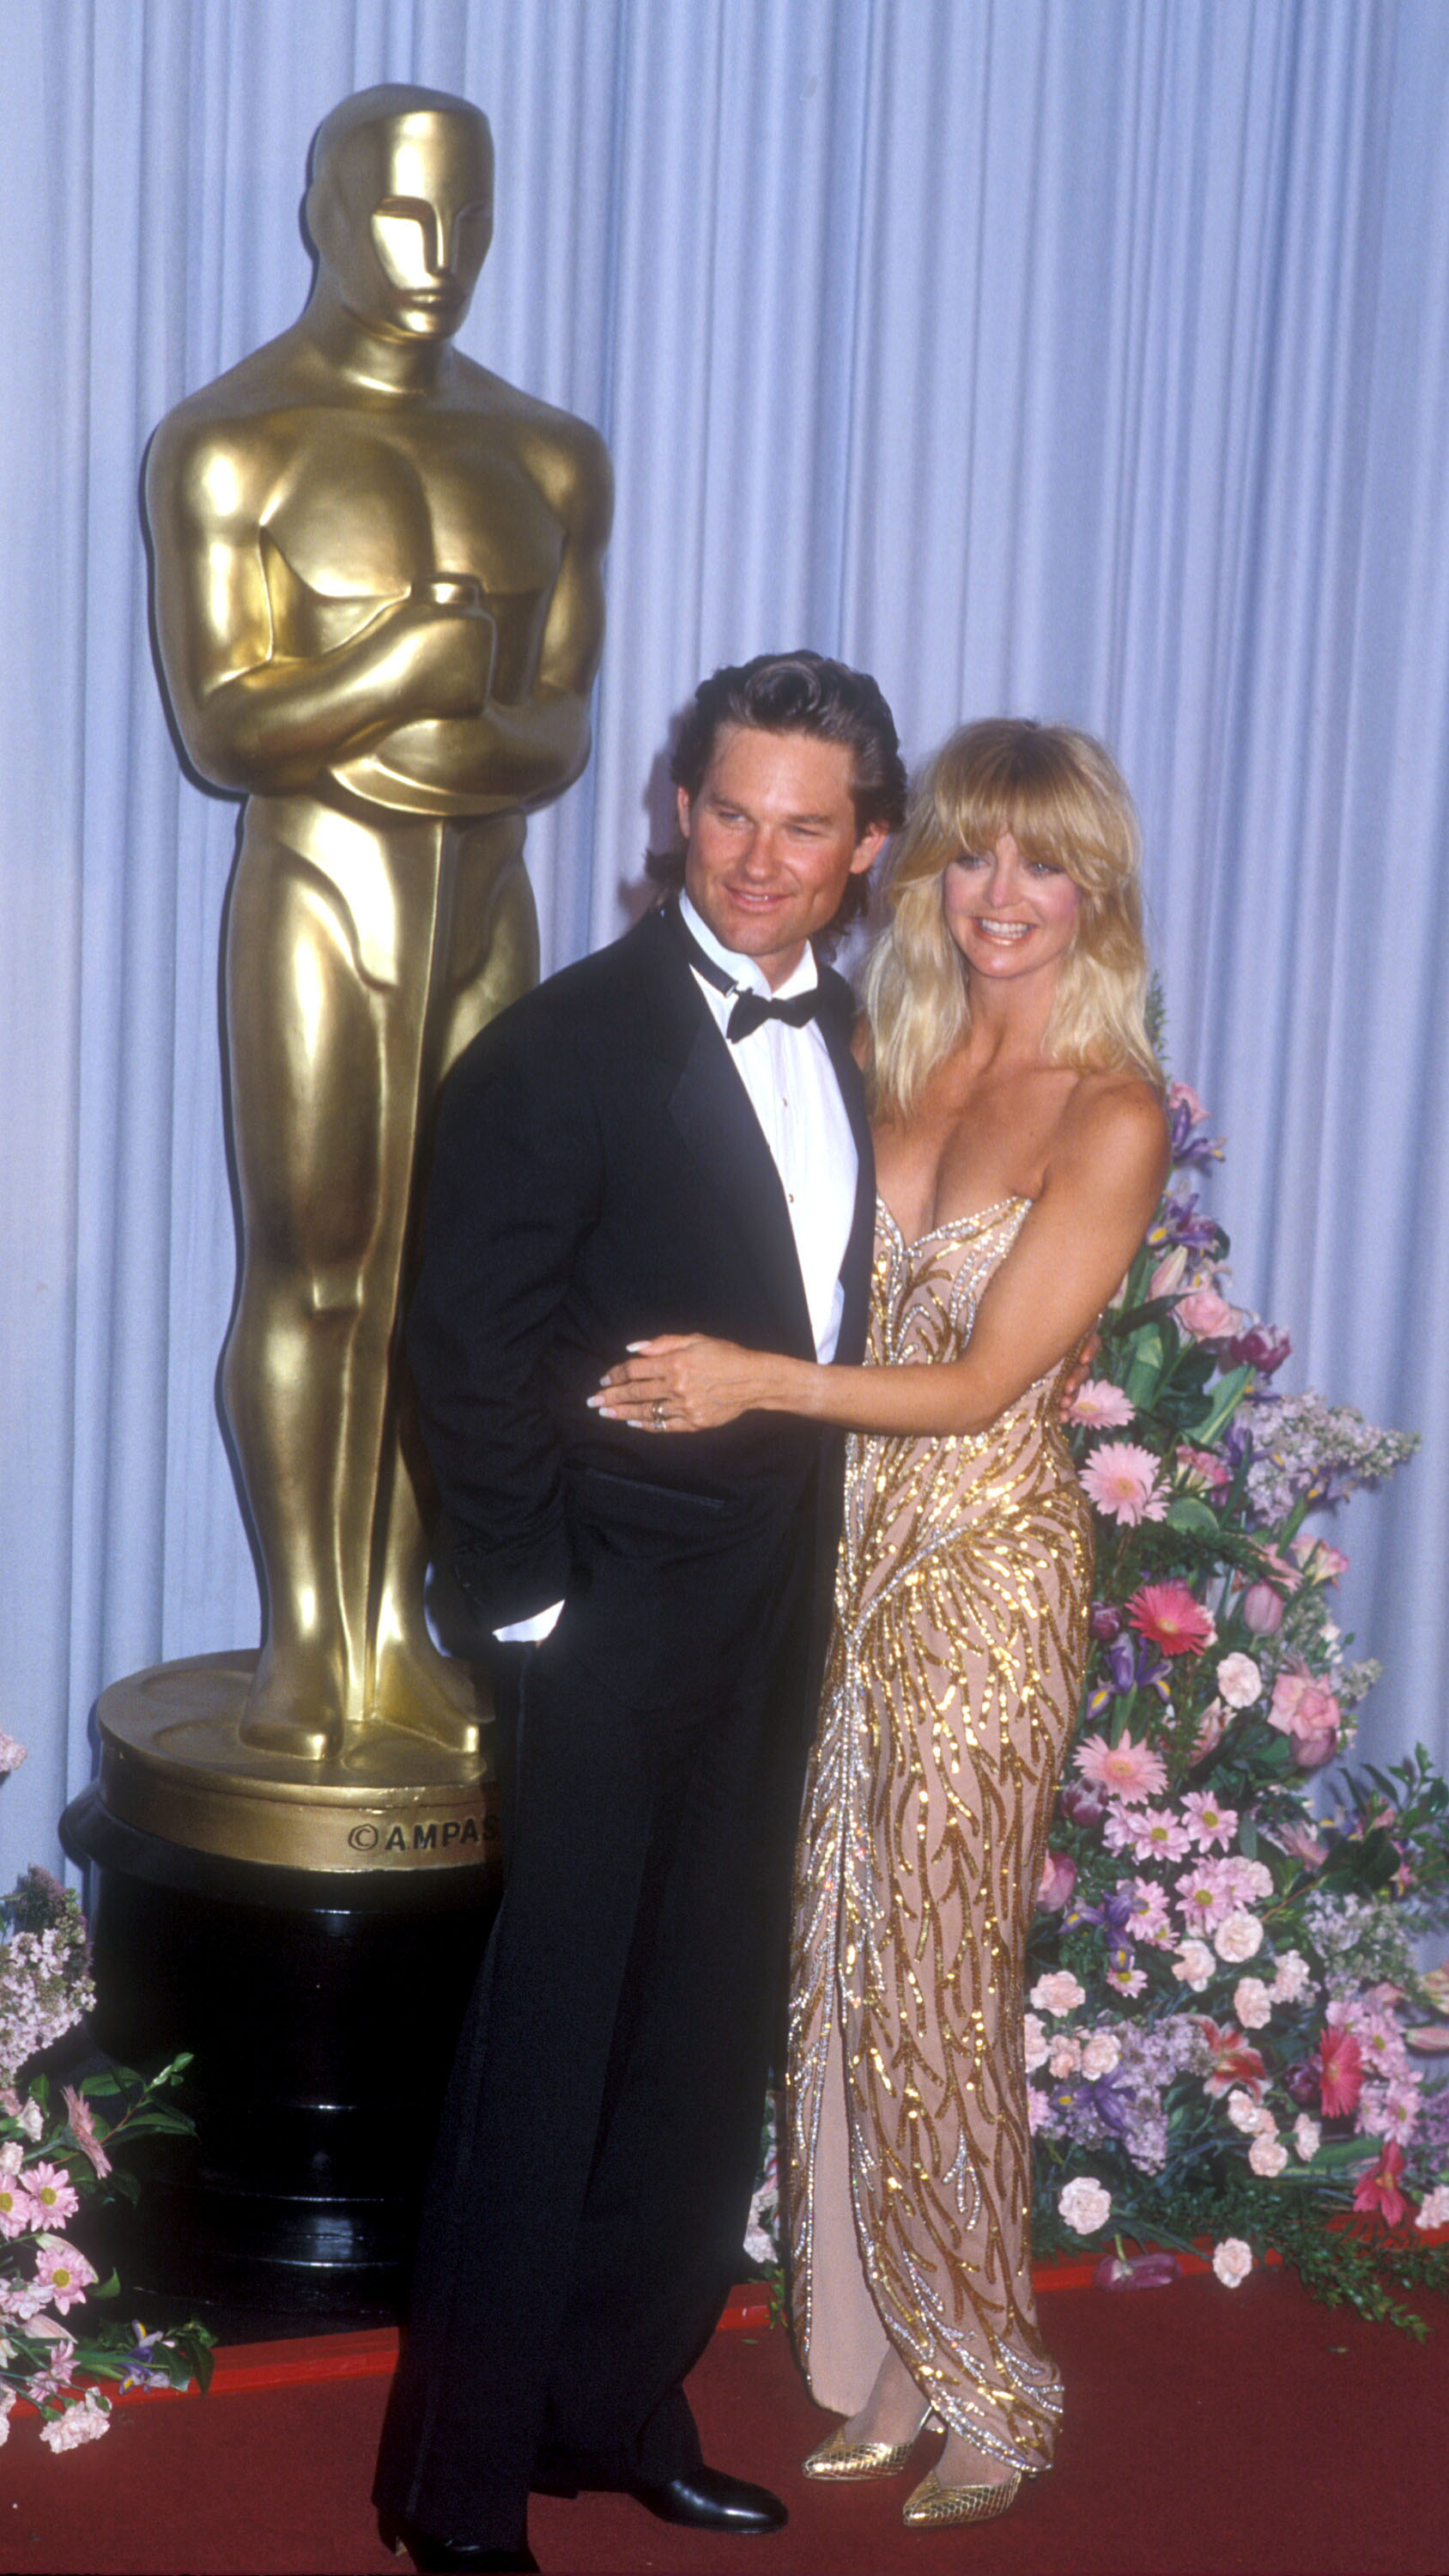 Kurt Russell and Goldie Hawn at the 61st Annual Academy Awards on March 29, 1989 l Source: Getty Images